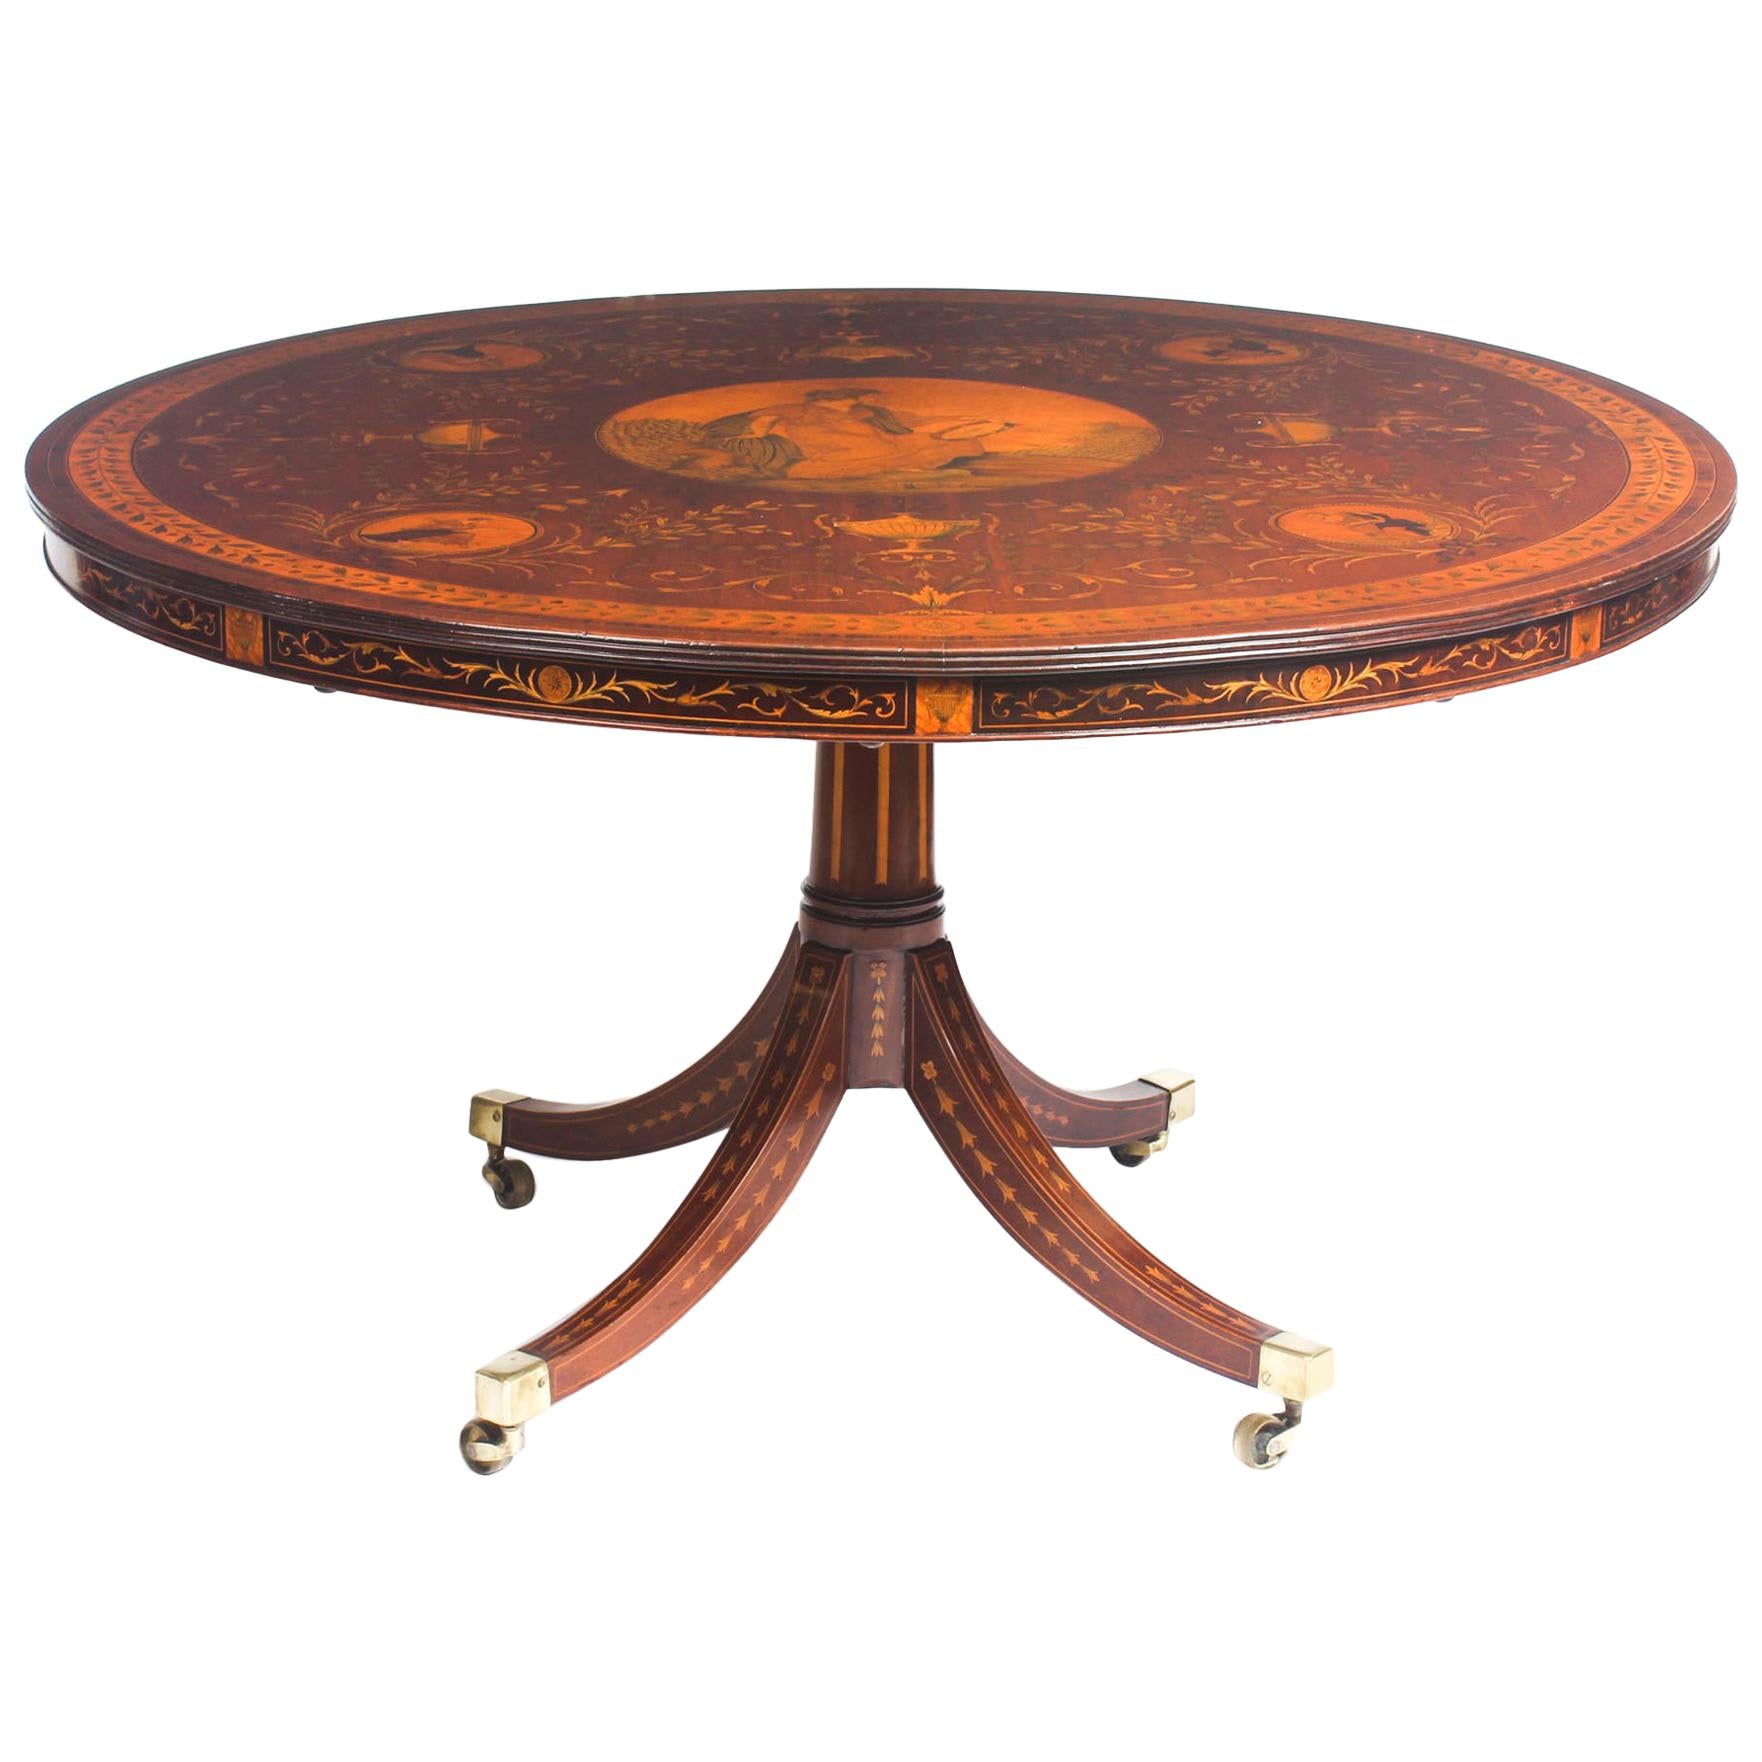 Antique Exhibition Quality English Mahogany Marquetry Centre Table, 19th Century